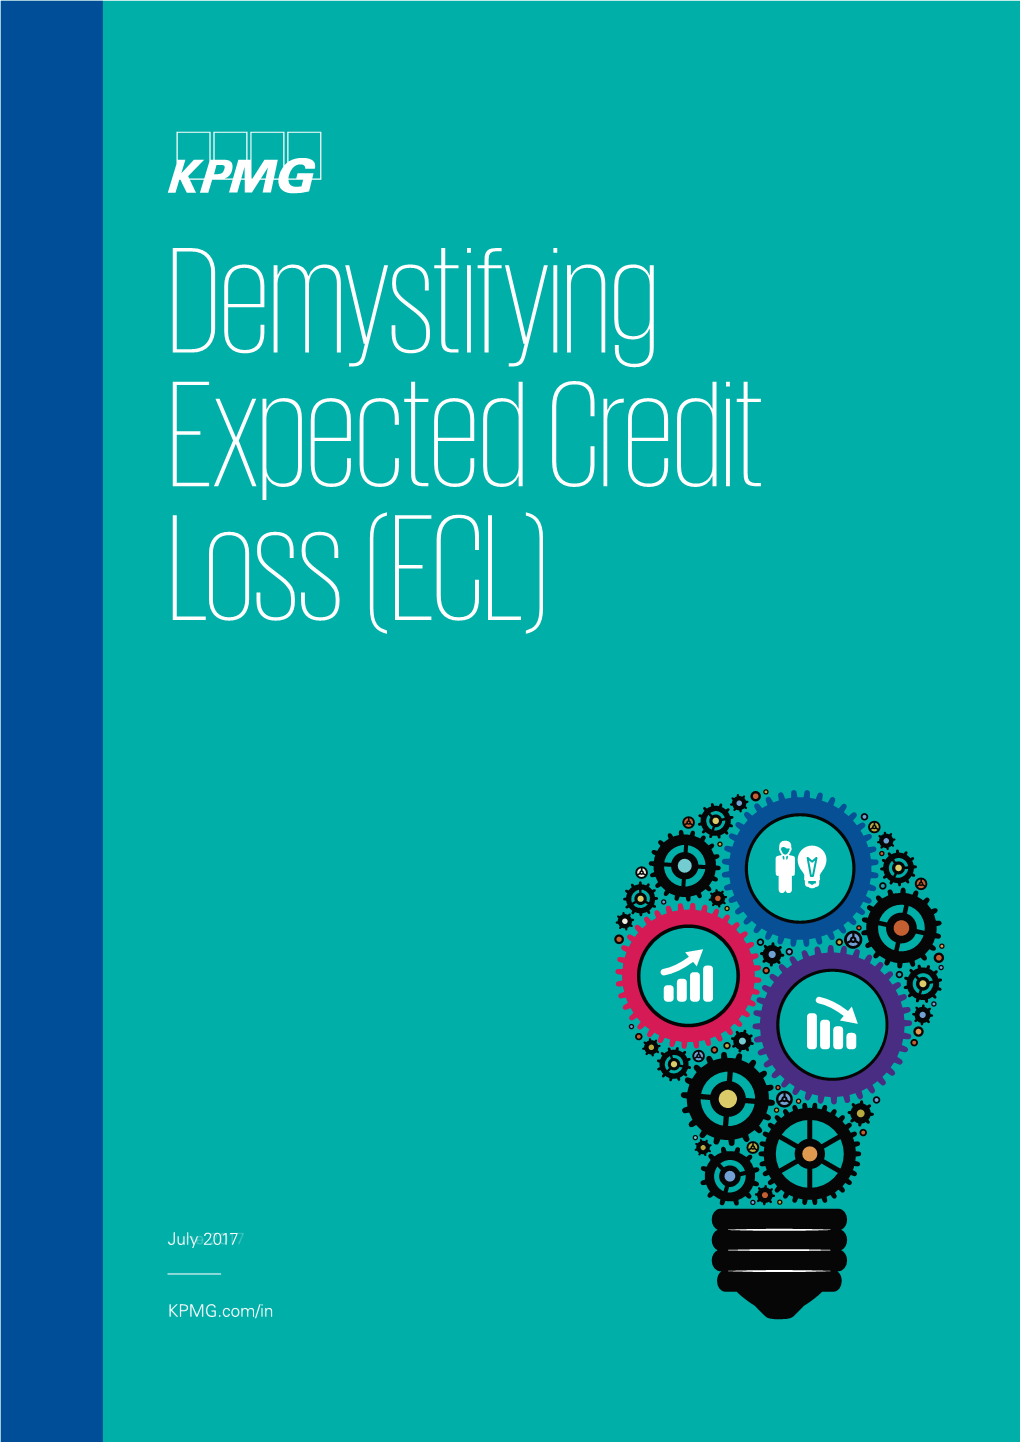 Demystifying Expected Credit Loss (ECL)